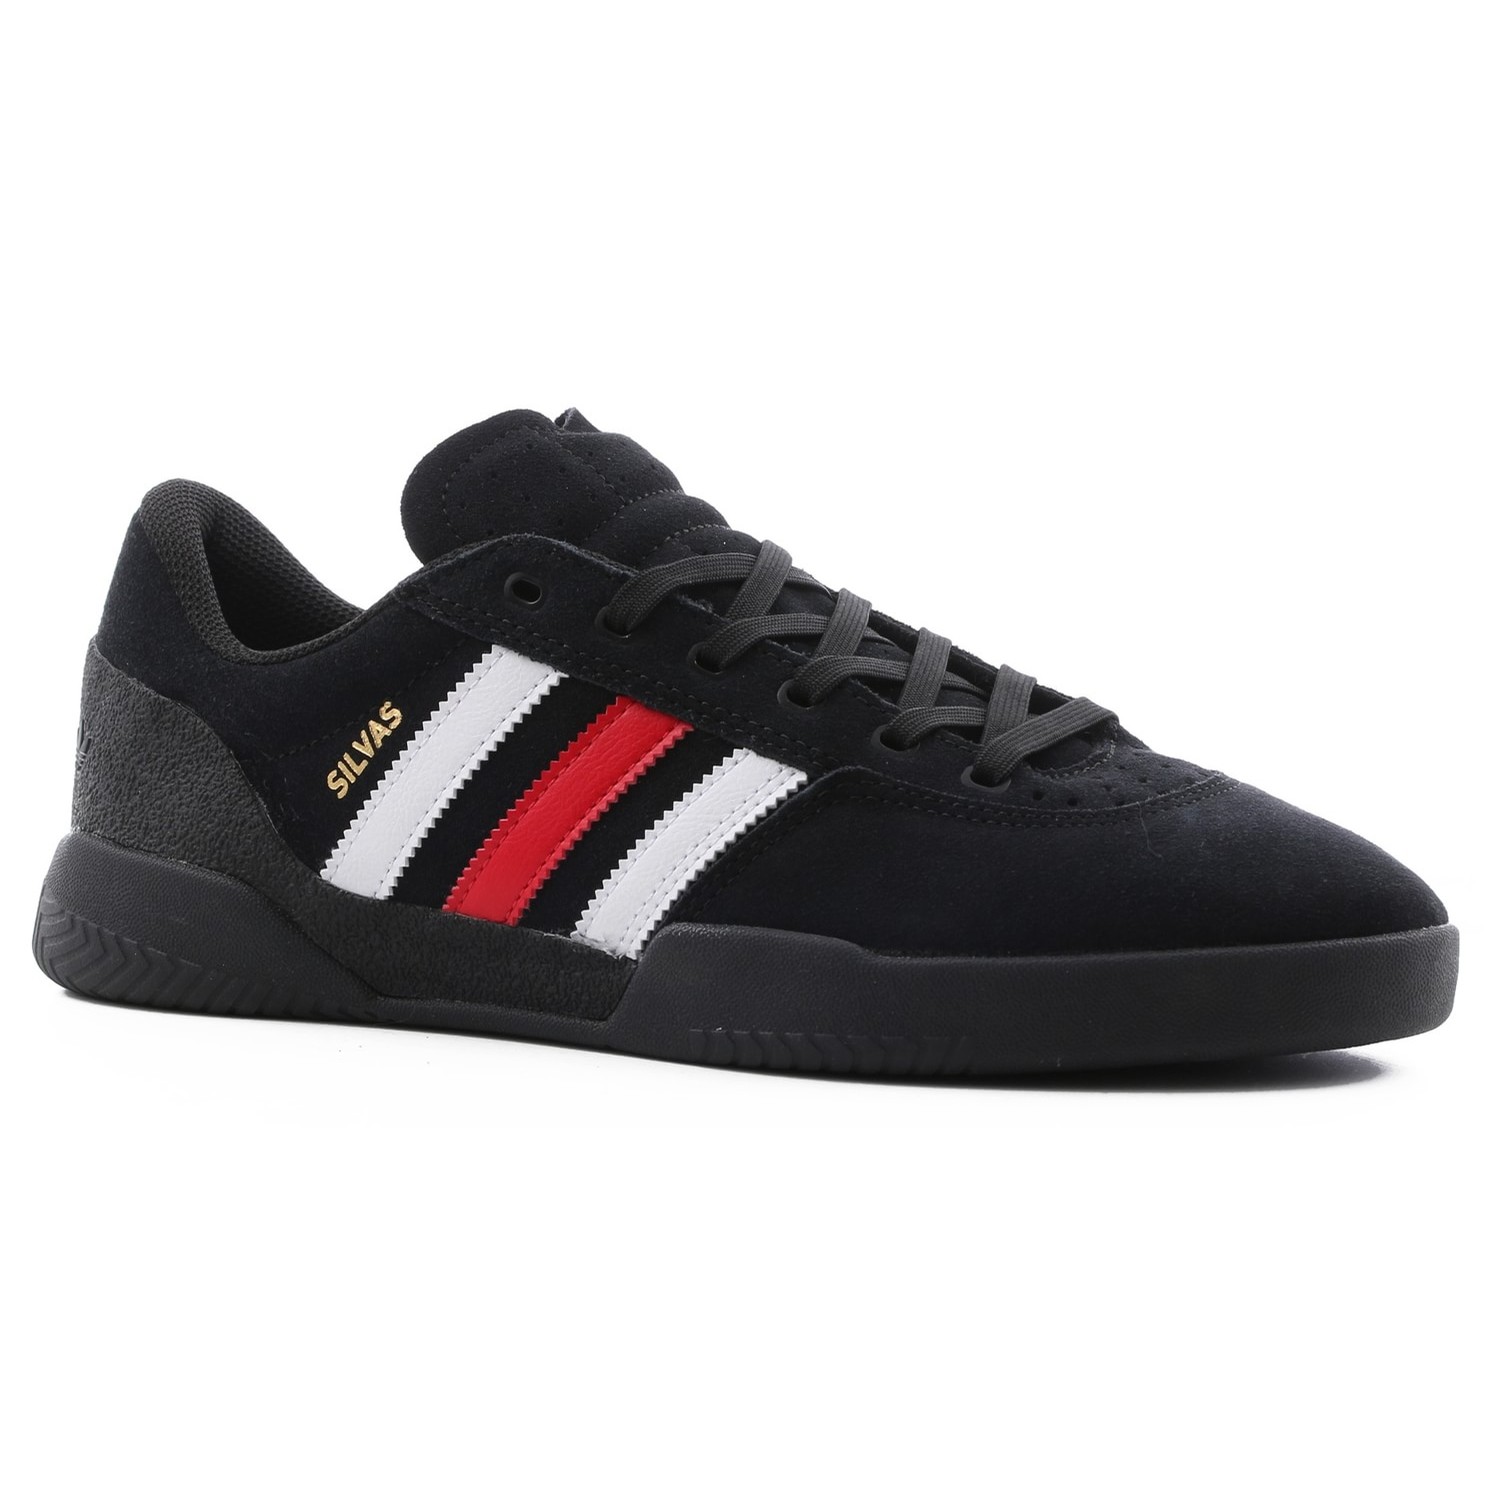 adidas city cup silvas black white & red shoes